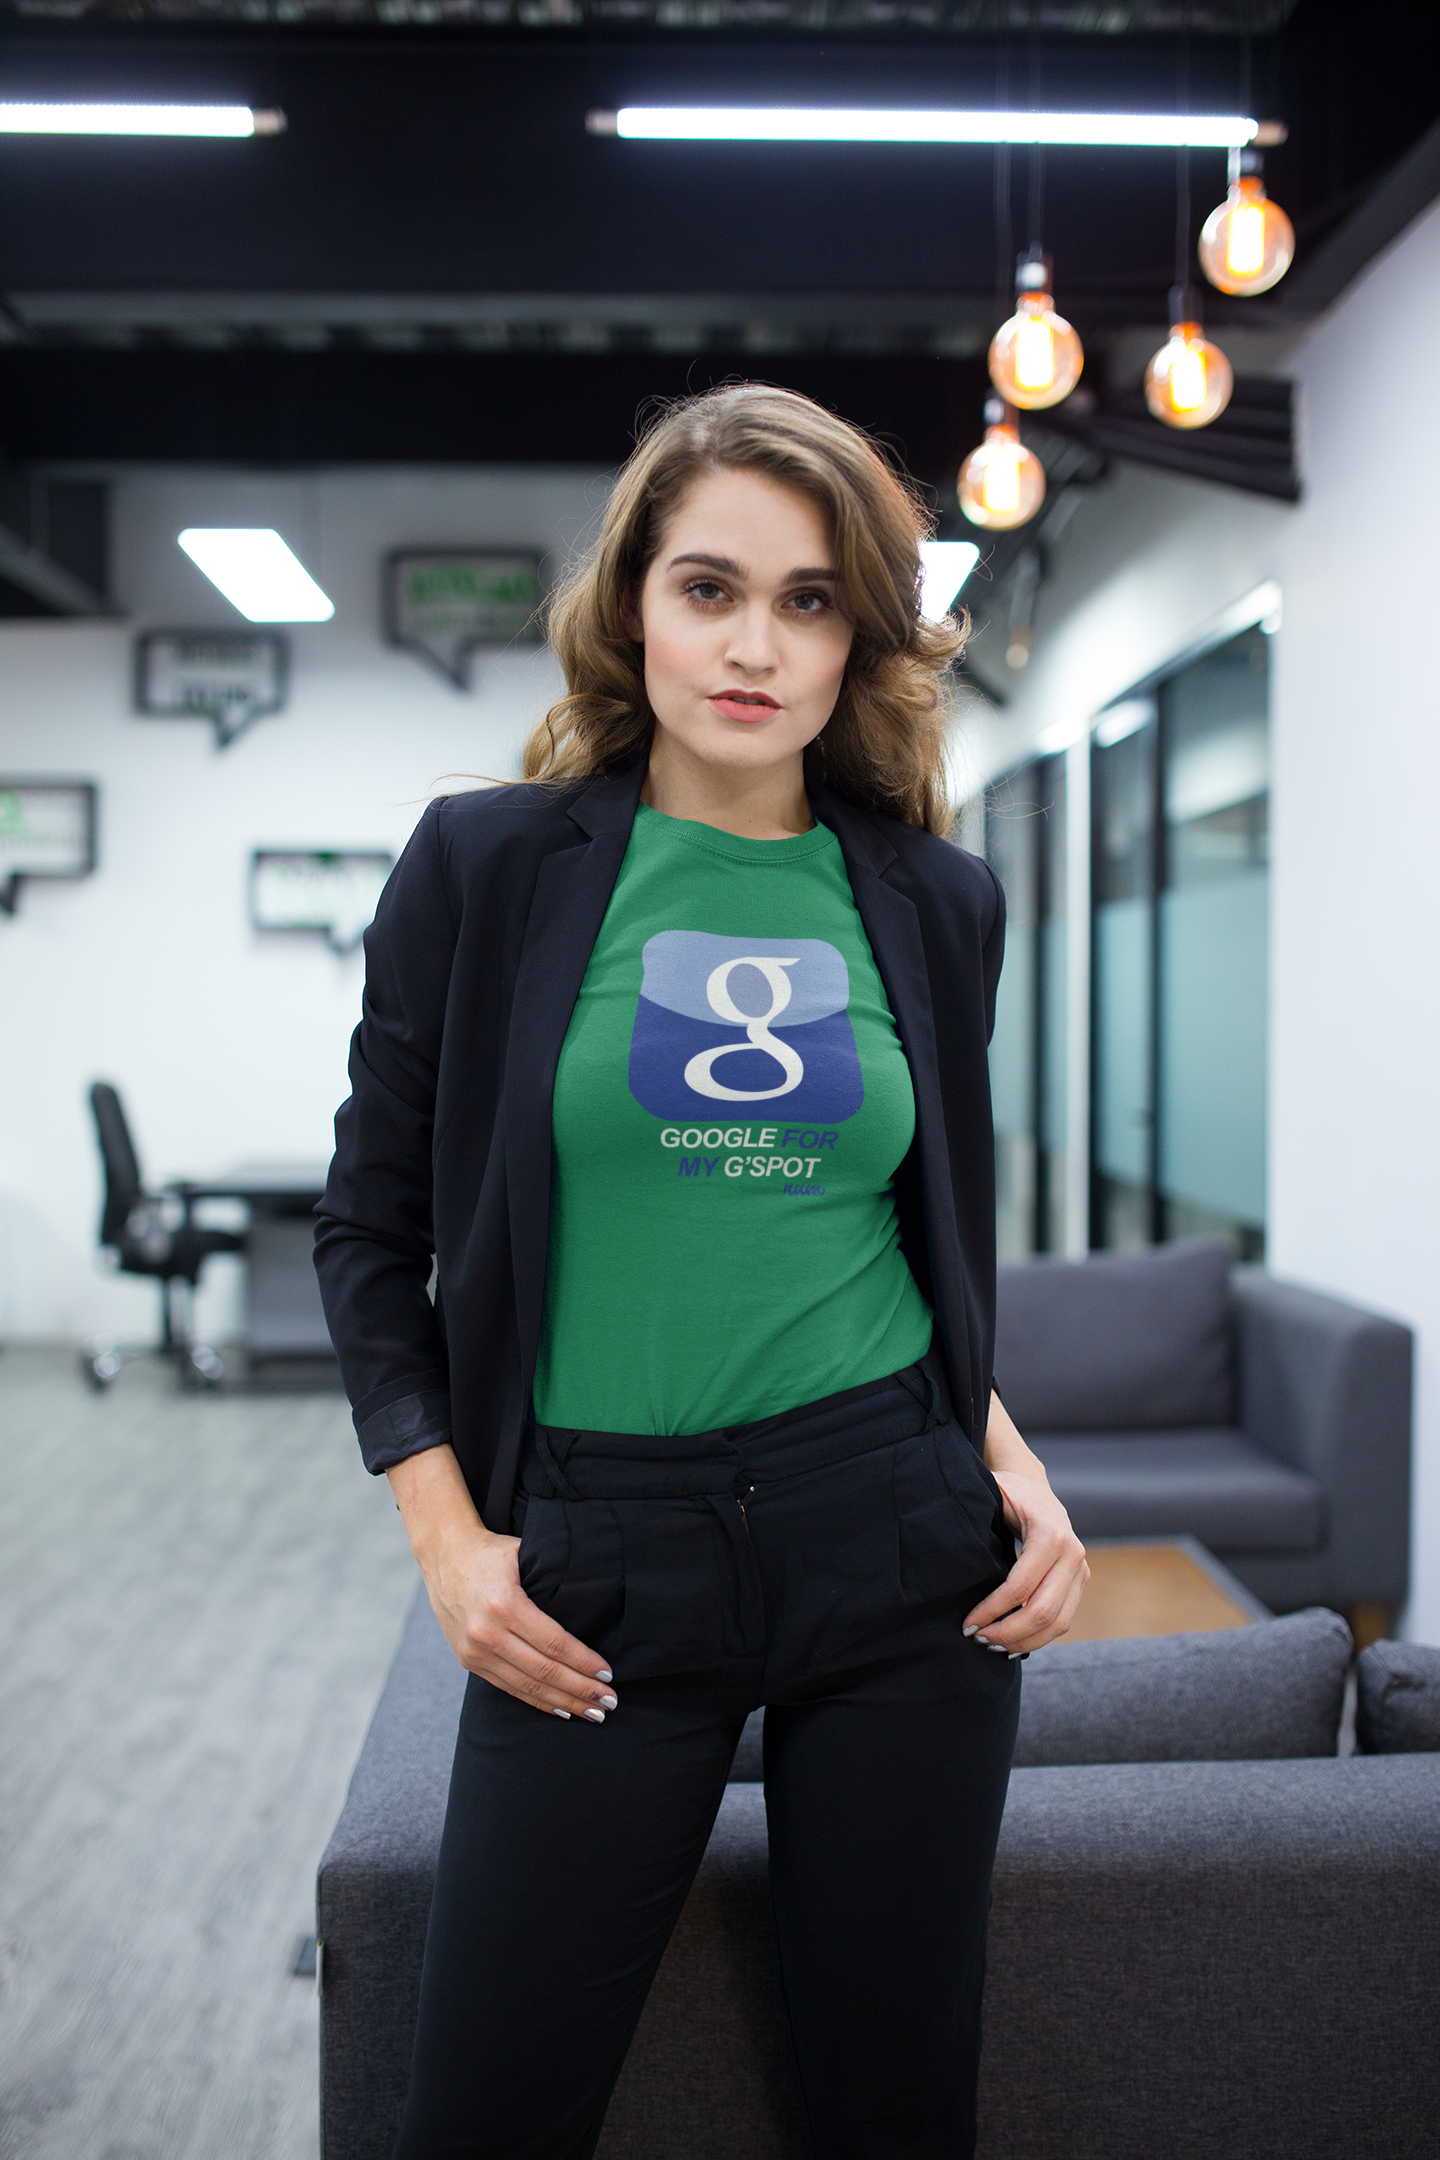 beautiful-woman-wearing-a-t-shirt-mockup-and-a-jacket-while-at-the-office-a20529.png